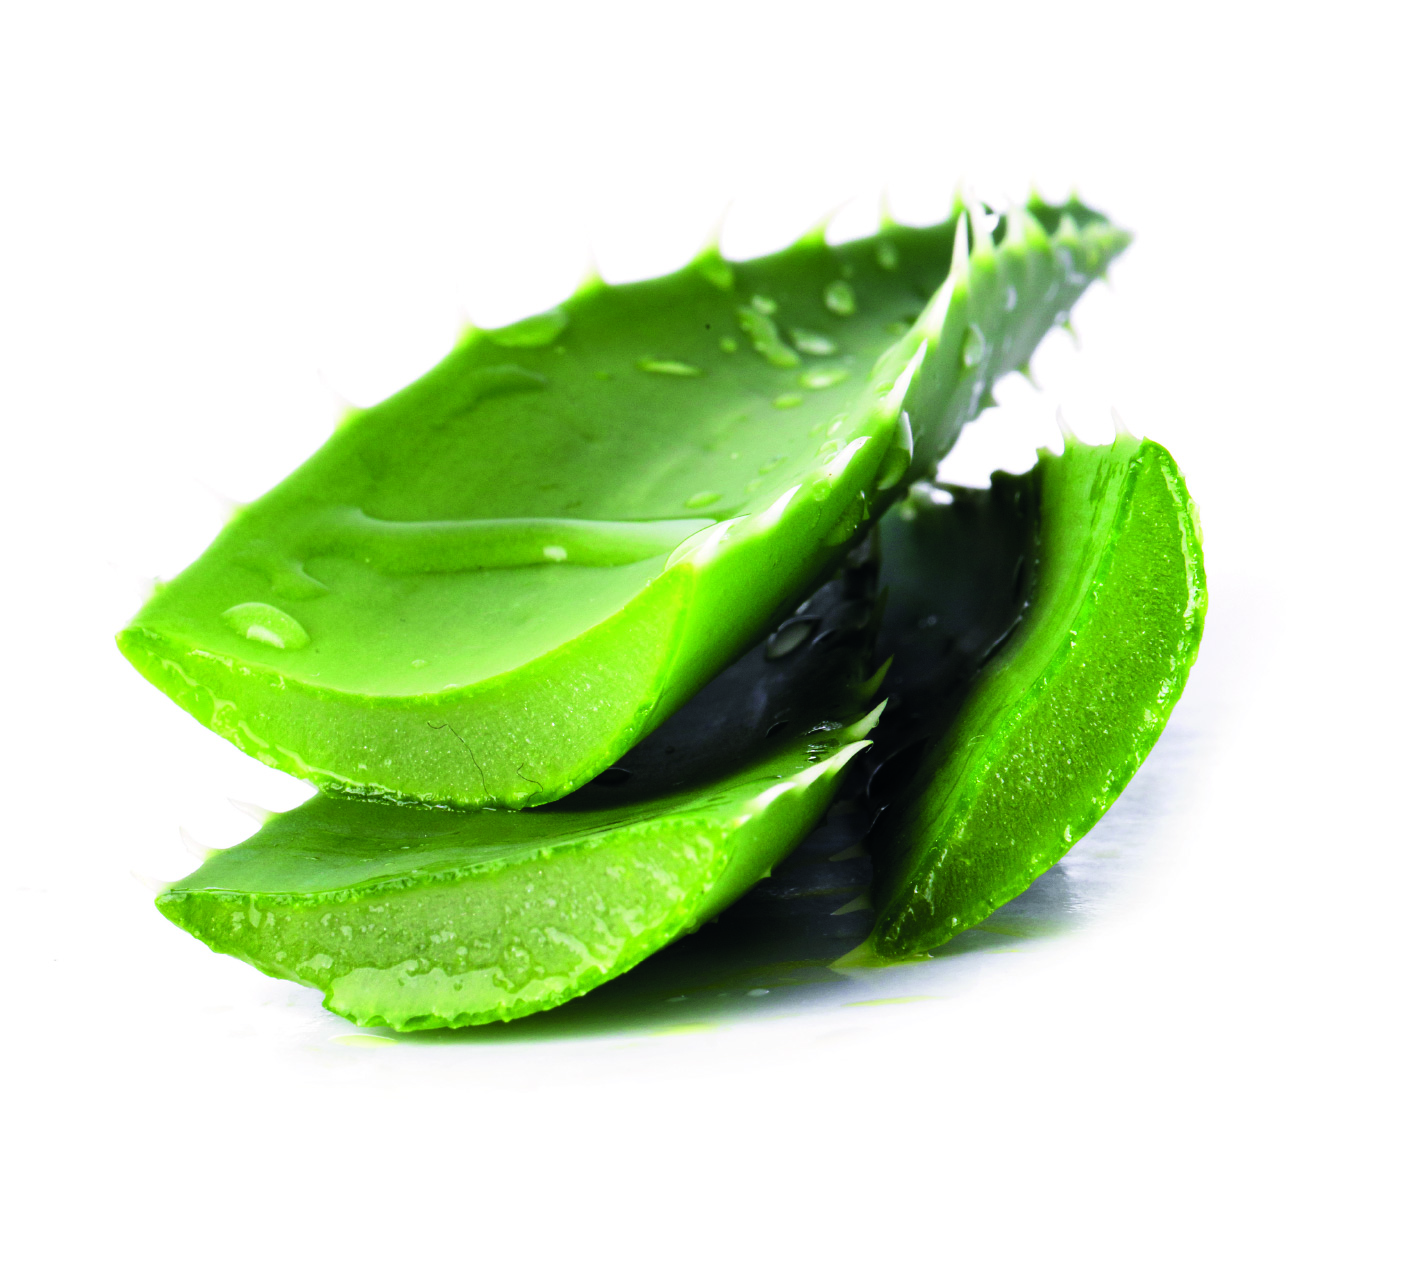 There are many health benefits of aloe vera since it is rich in nutrition and vitamins